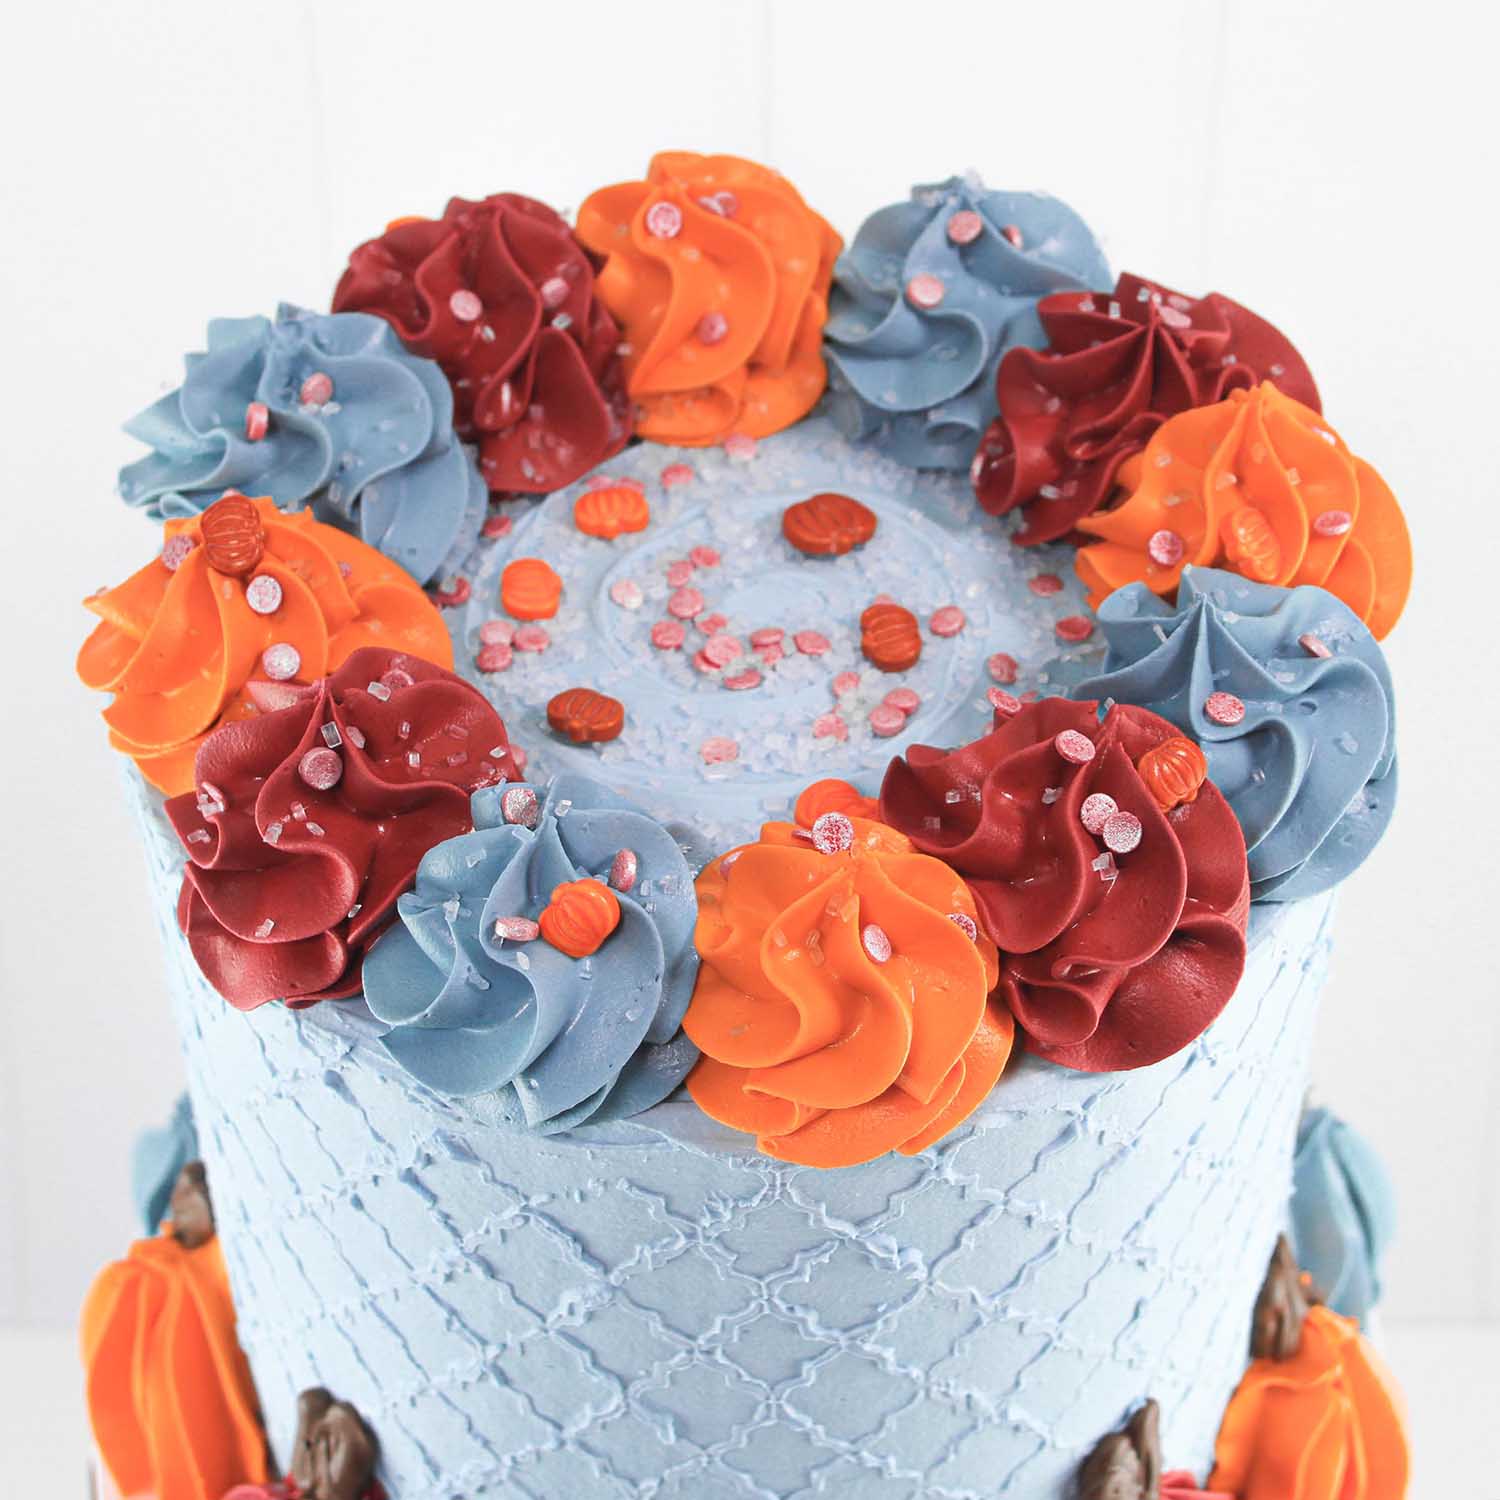 Swirls in burgundy, wedgewood and pumpkin buttercream piped with a 1M tip and sprinkles of red confetti, blue sugar crystals and edible pumpkin sprinkles.